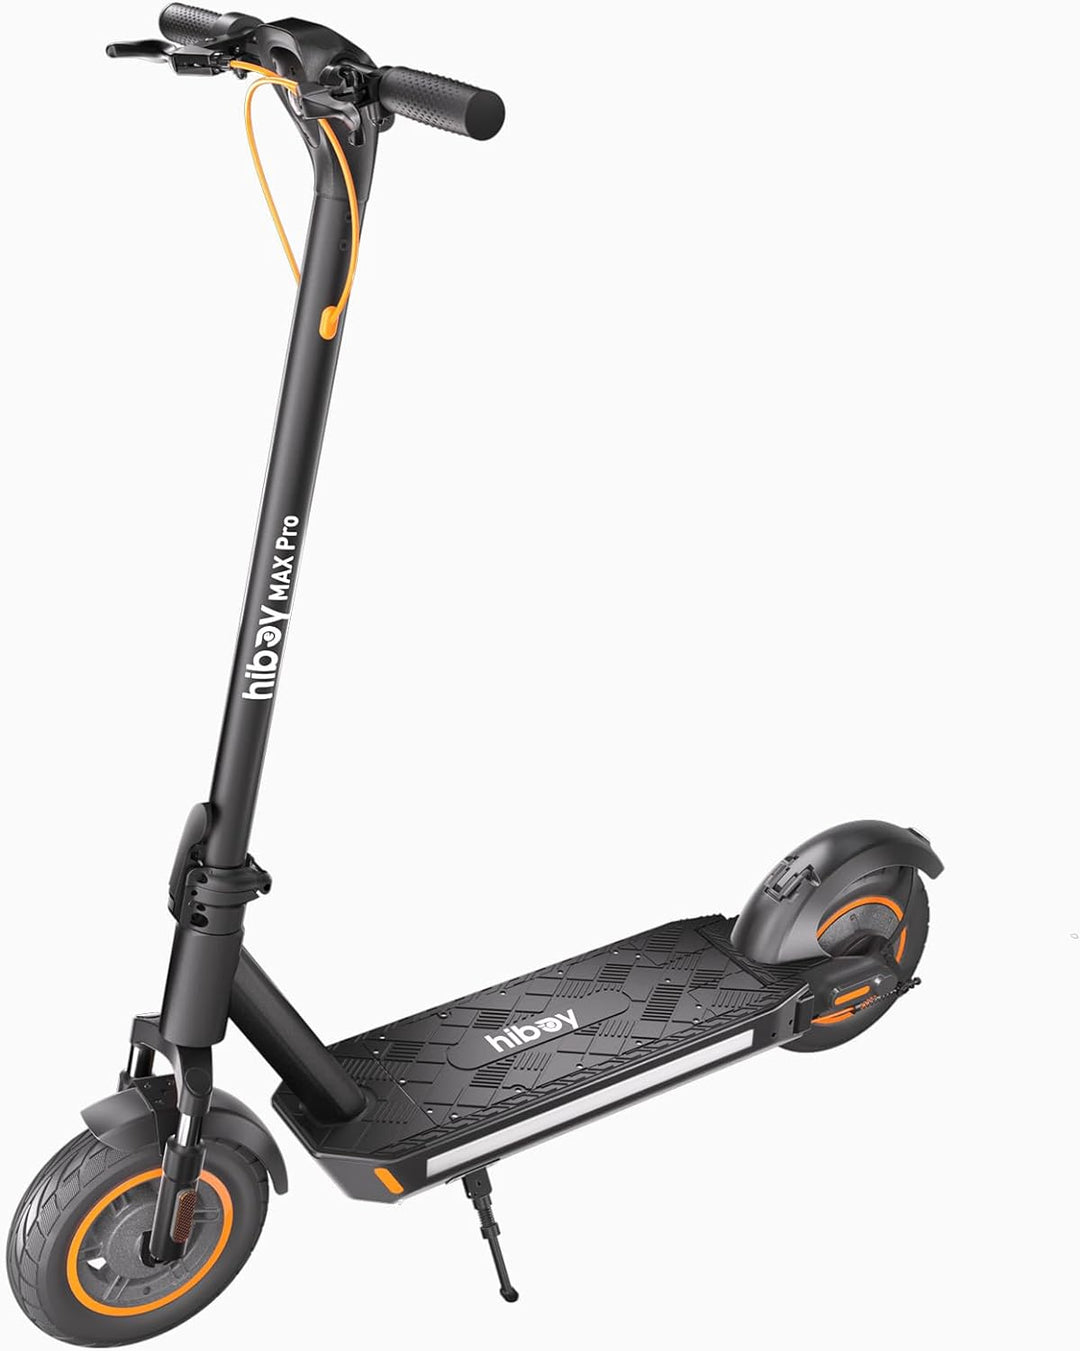 Max Pro Electric Scooter 500W